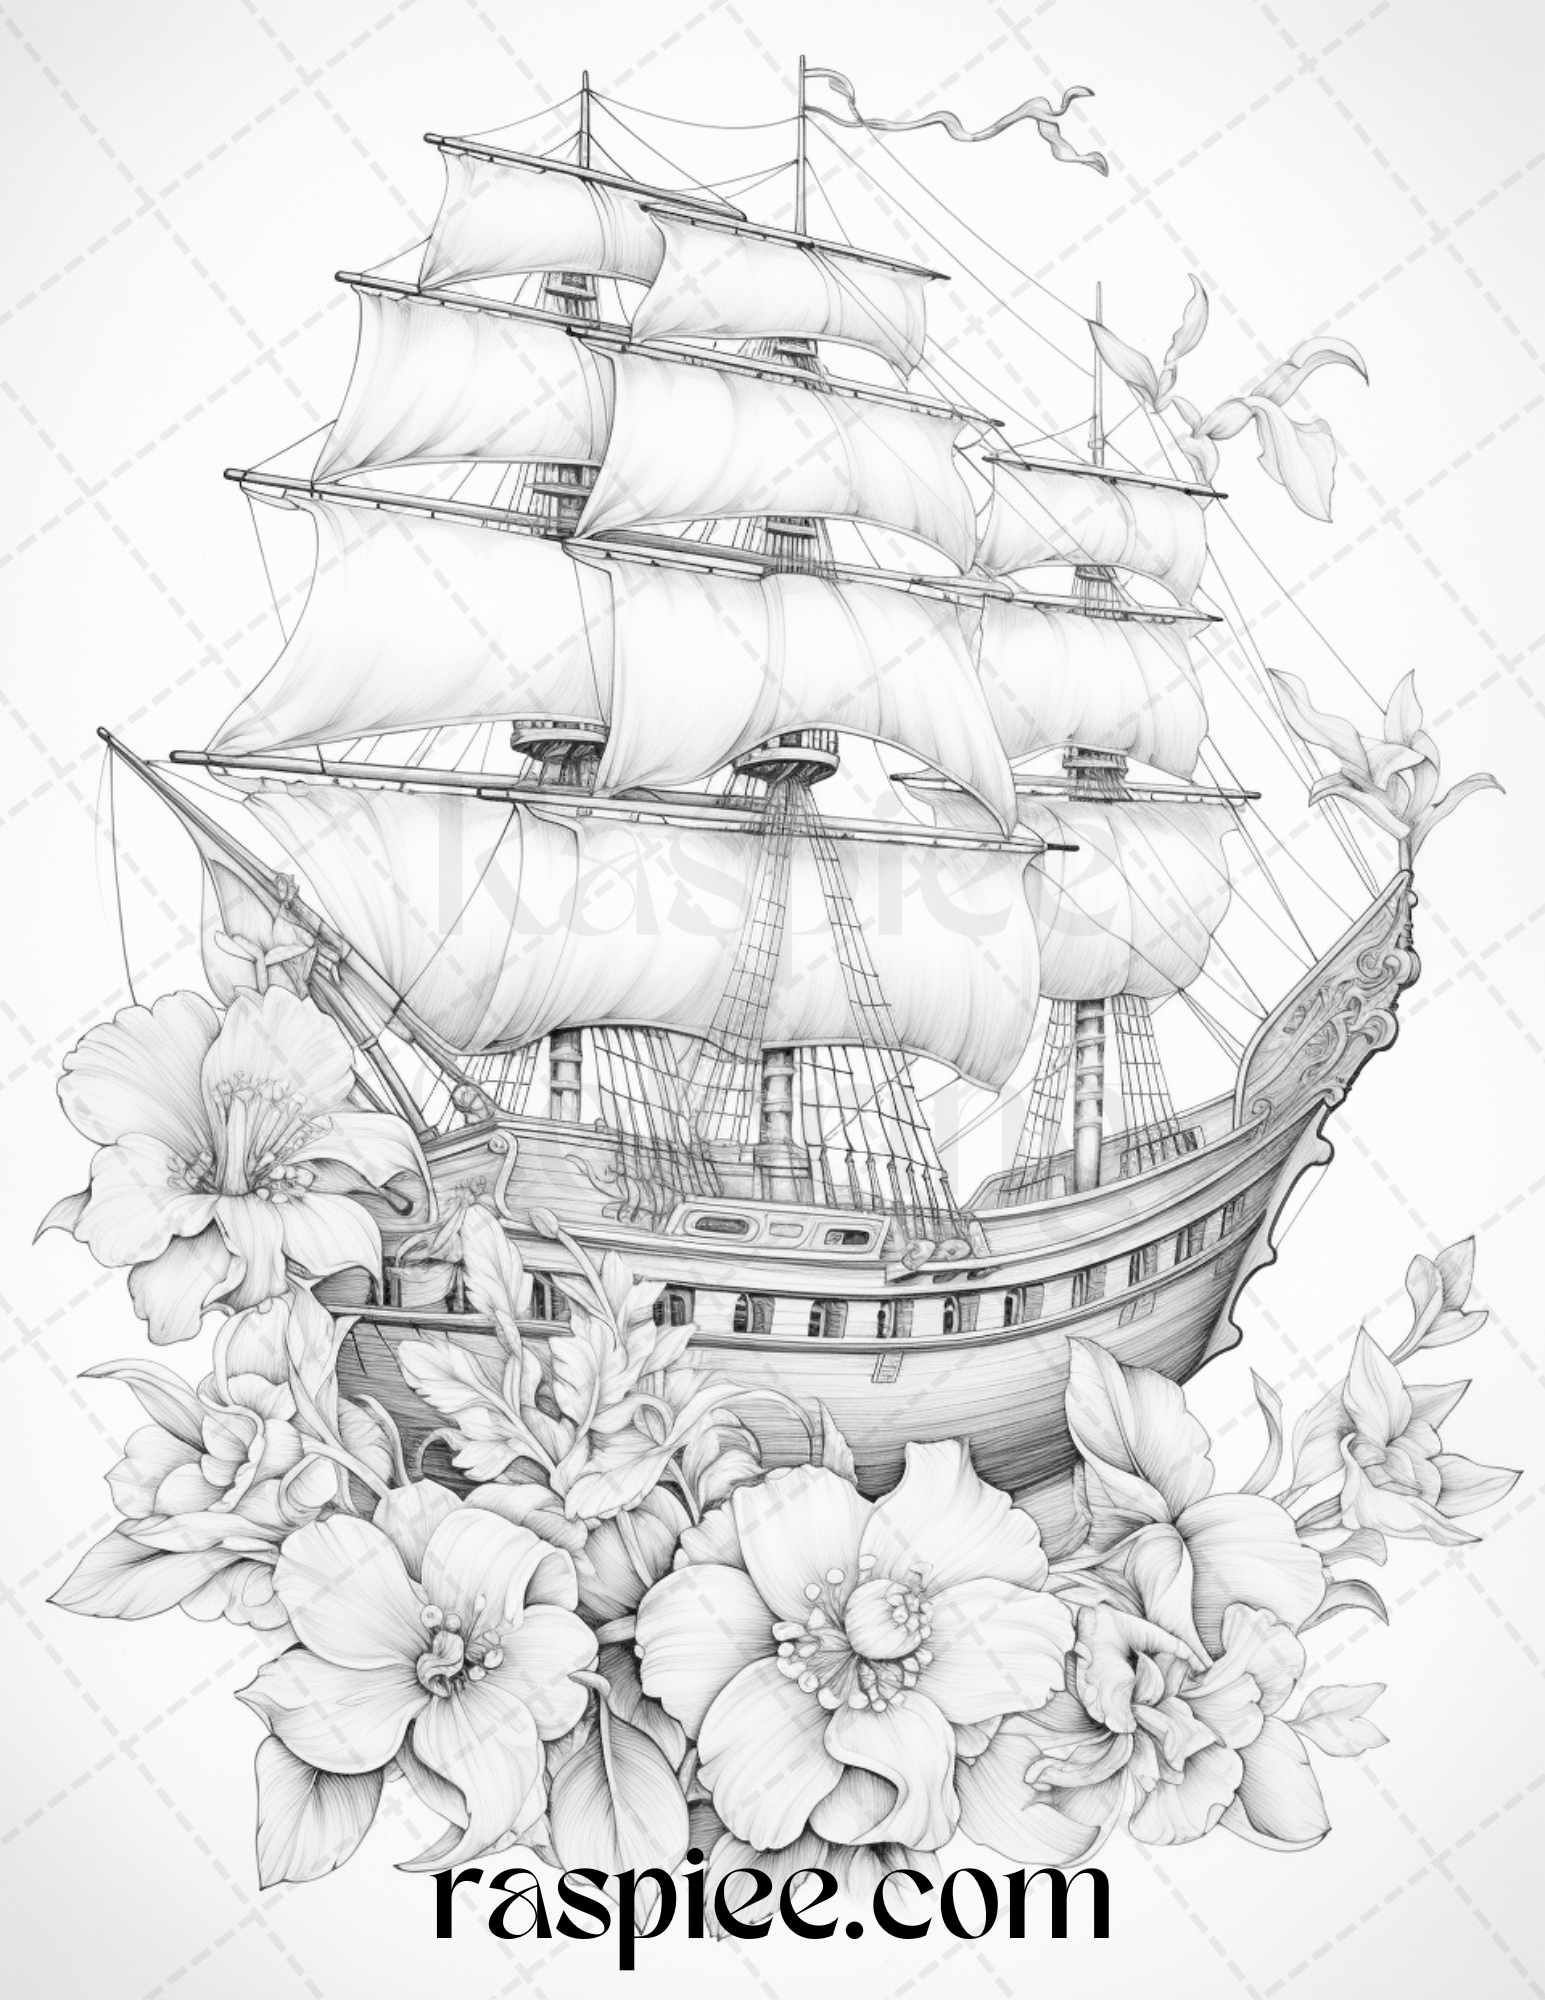 Flower Ships Coloring Page for Adults, Printable Grayscale Coloring Sheet, Relaxing Adult Coloring Activity, Stress-Relief Coloring Page, Instant Download Coloring Printable, DIY Adult Coloring Book Page, Creative Coloring for Relaxation